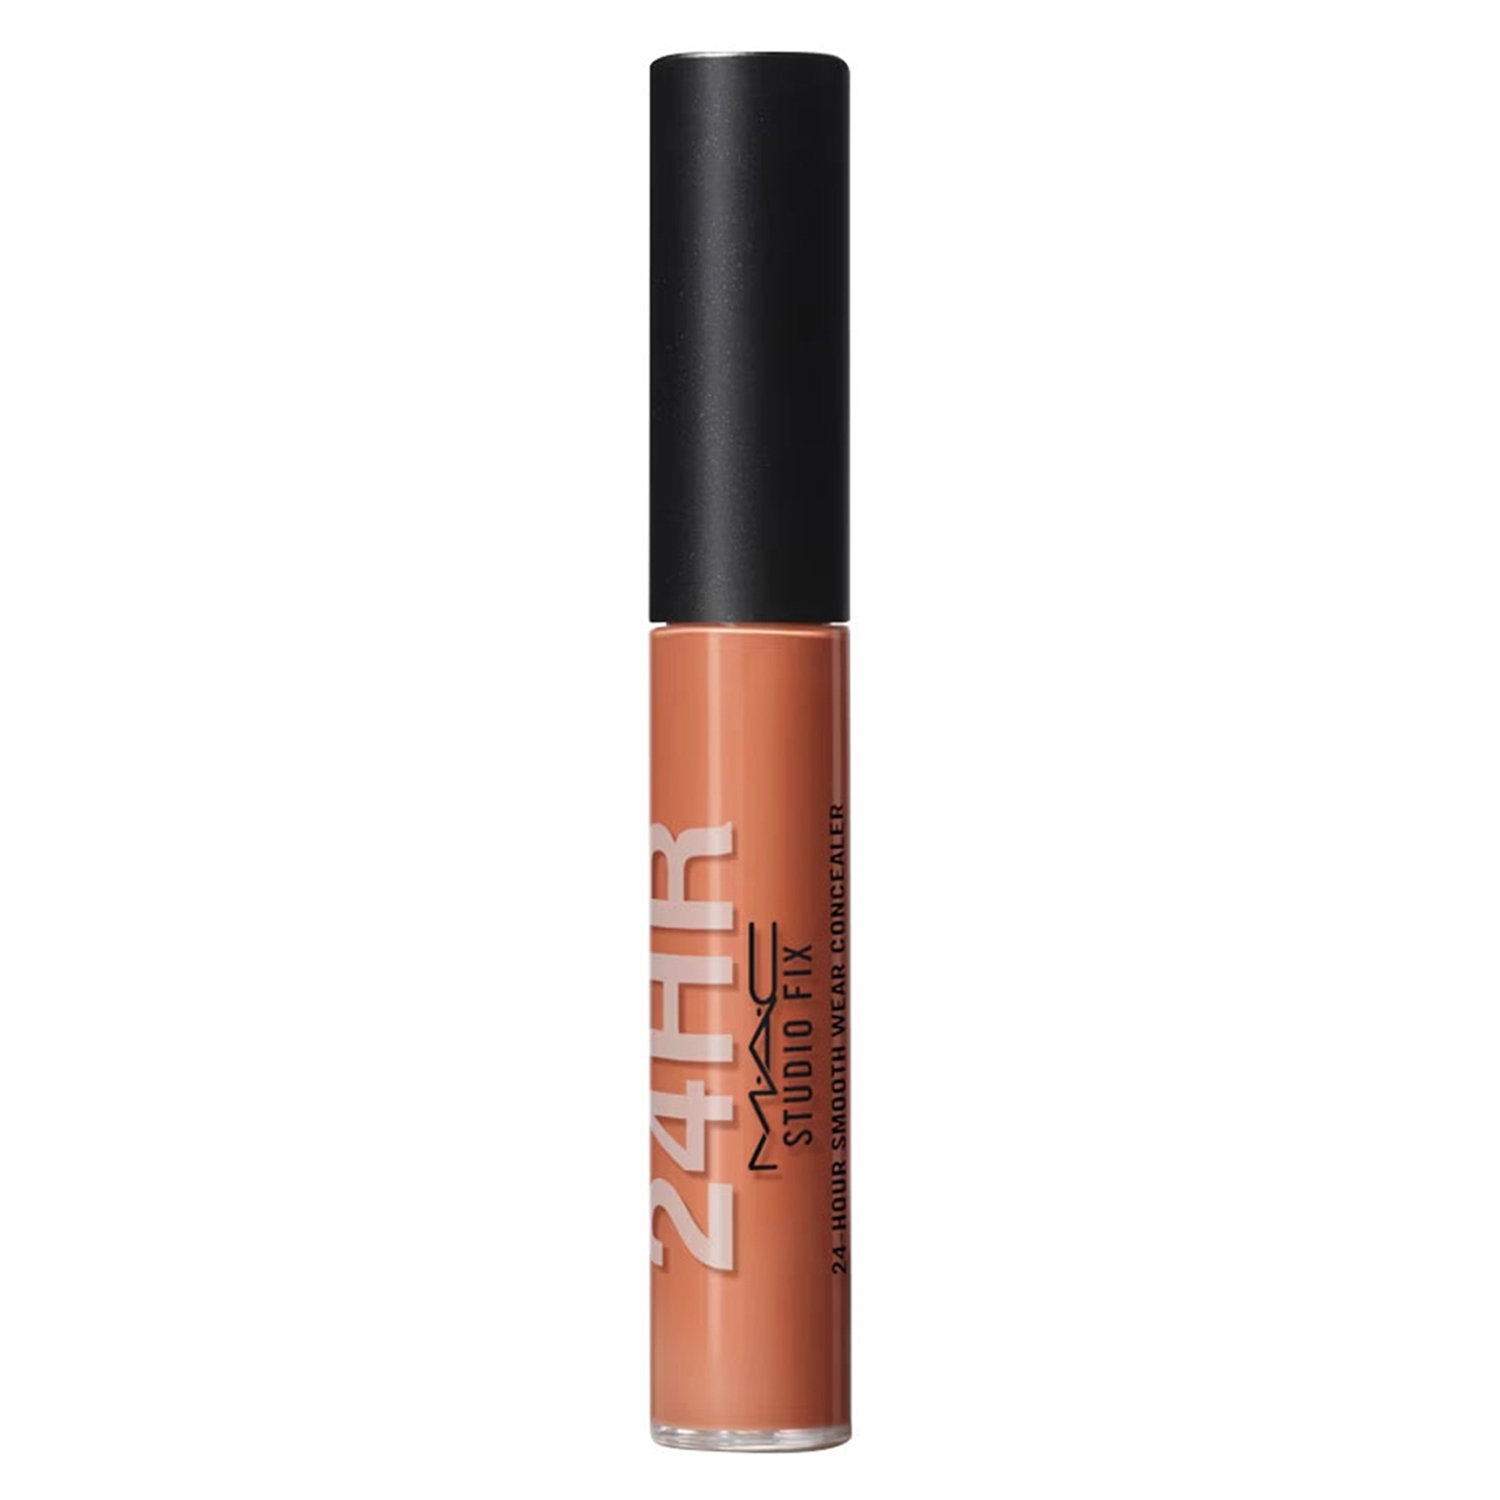 M.A.C | M.A.C Studio Fix 24-Hour Smooth Wear Concealer - NW51 (7ml)